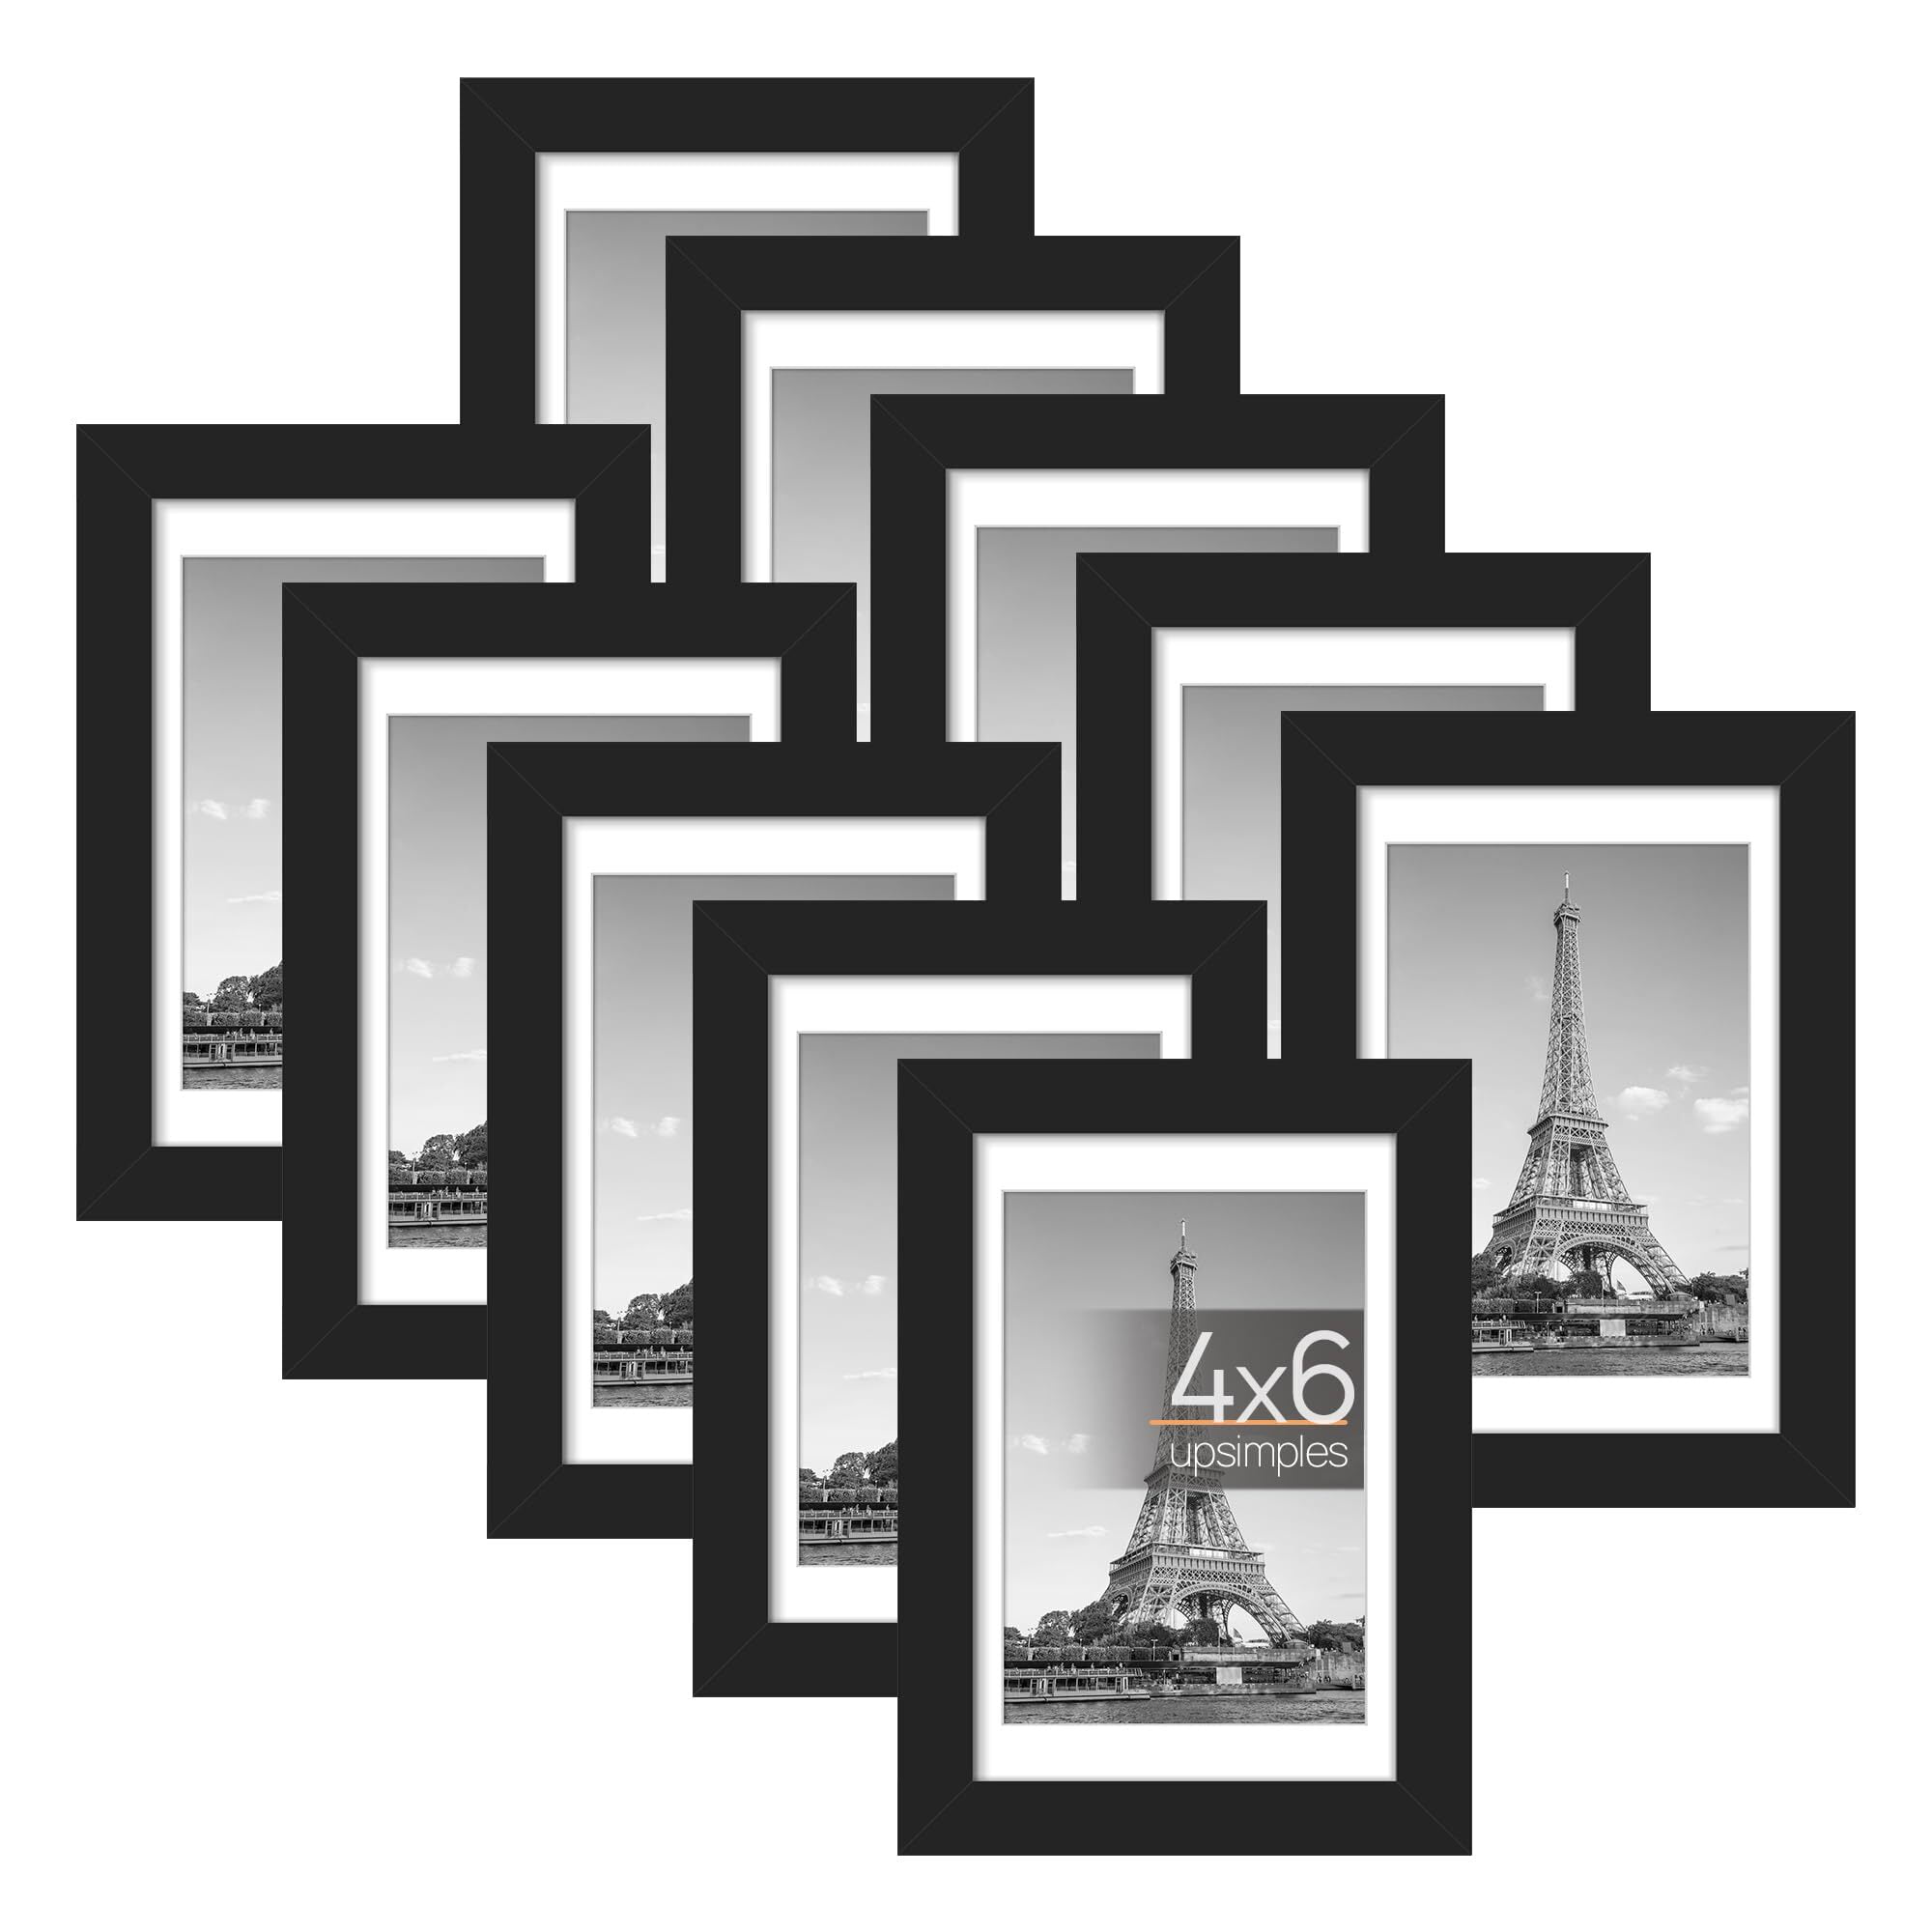 Mainstays 8-Opening Plaque Black Wall Collage Frame (Holds 6-4x6 & 2-4x4  Photos)